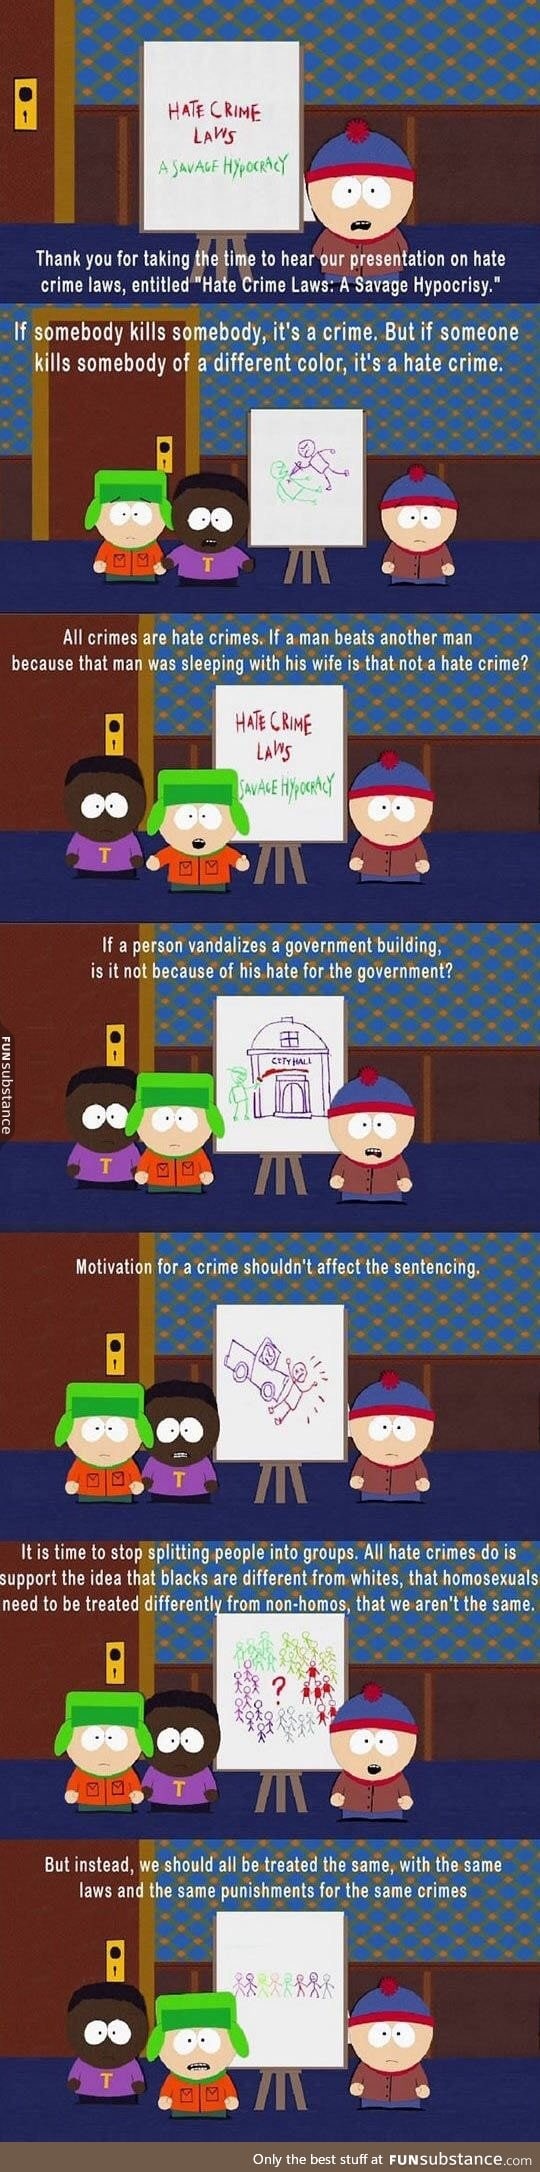 Why South Park is Important